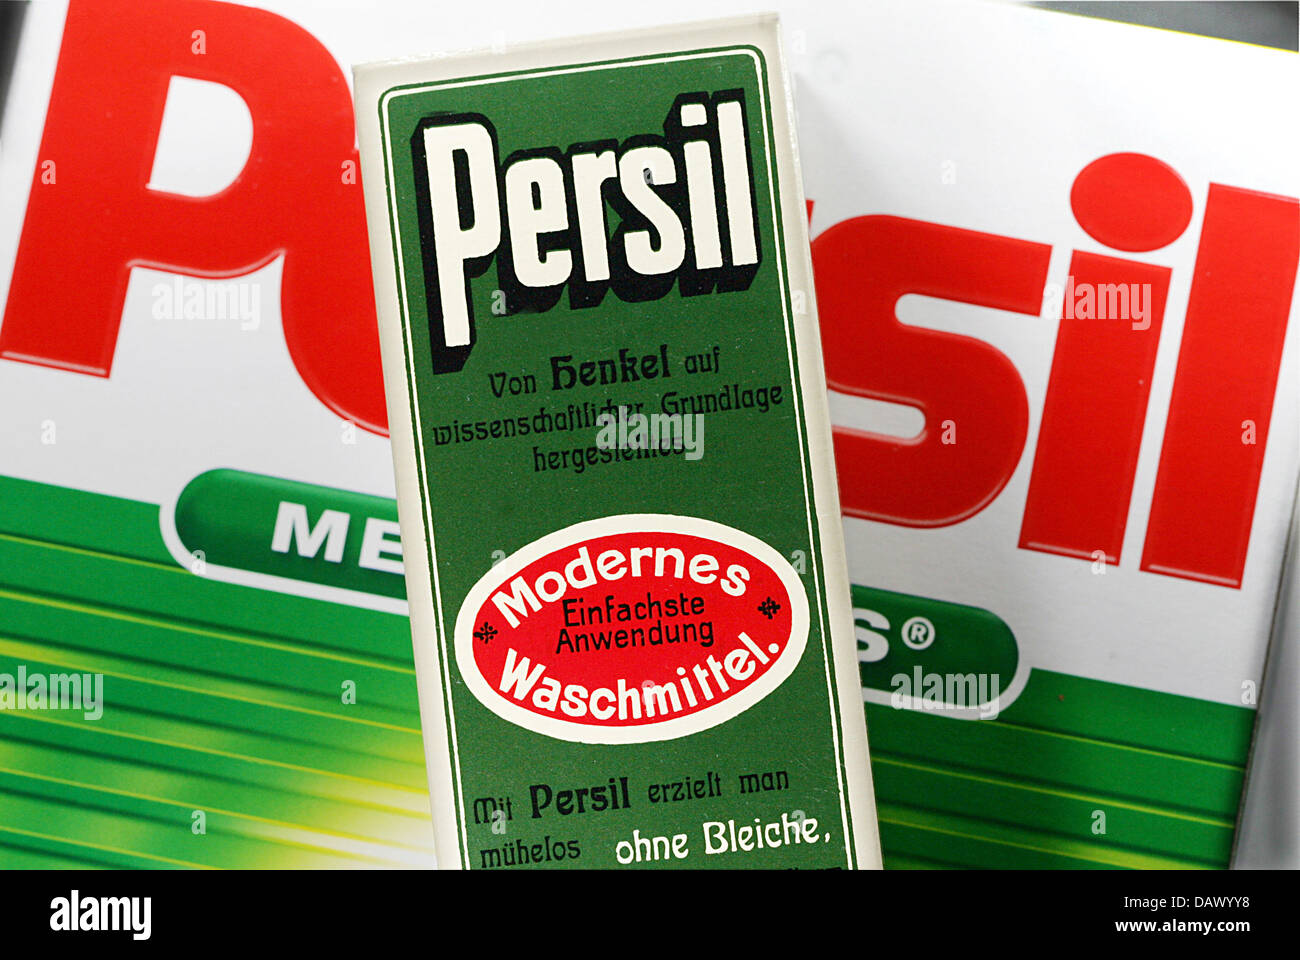 A historic package of 'Persil' washing powder is pictured on a recent one  in Duesseldorf, Germany, 09 May 2007. Fritz Henkel produced the washing  powder out of Perbrat and Silicat which also